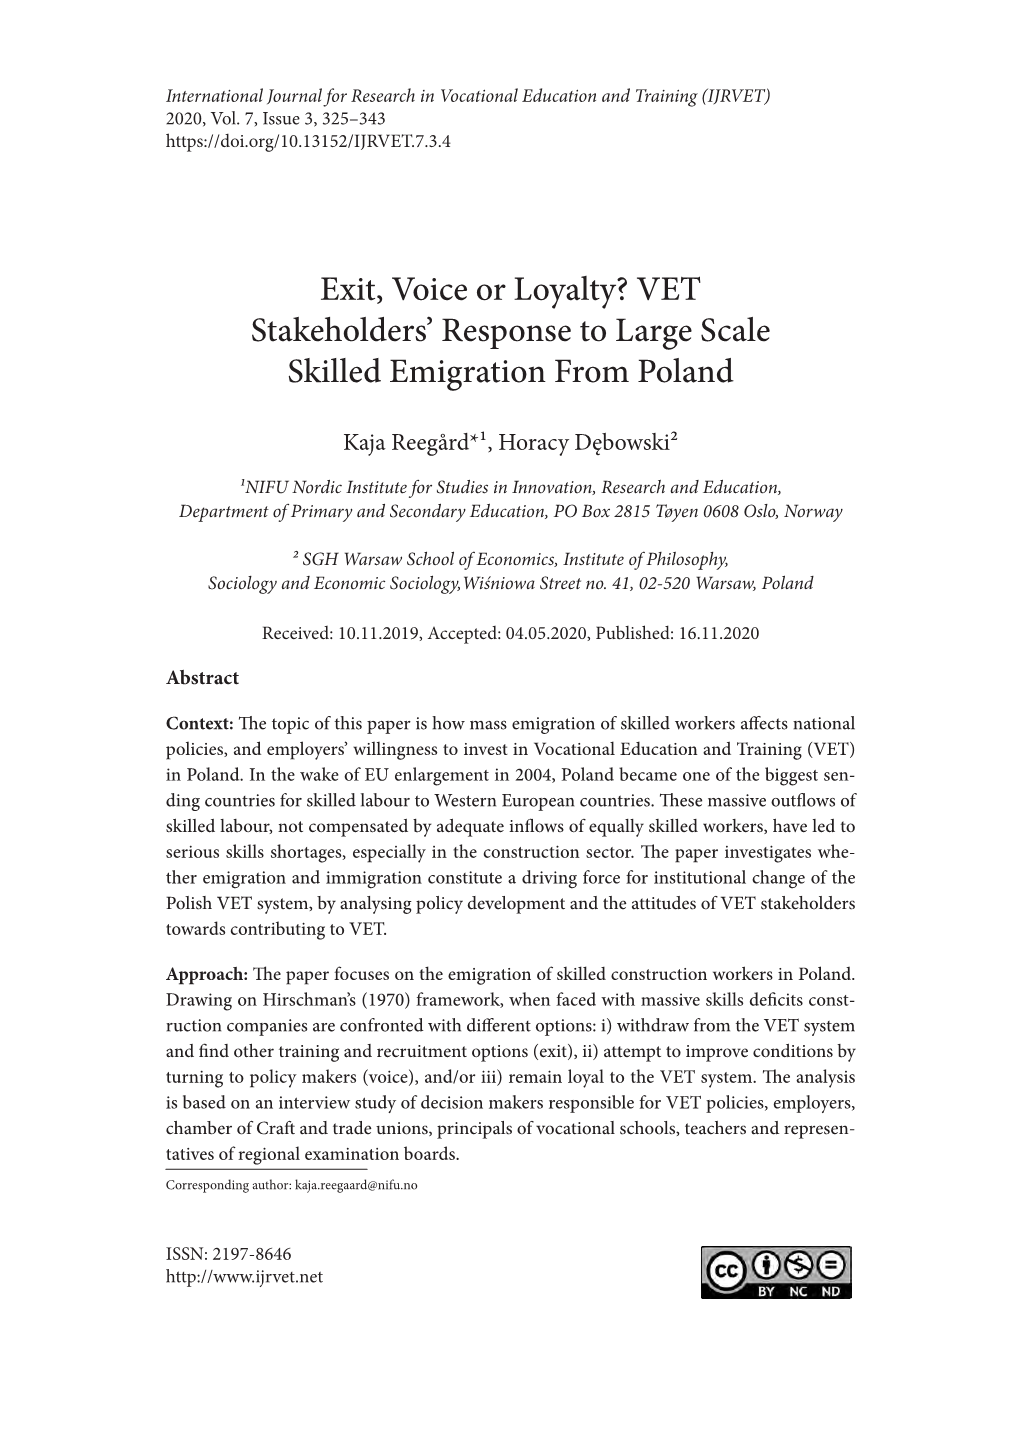 VET Stakeholders' Response to Large Scale Skilled Emigration